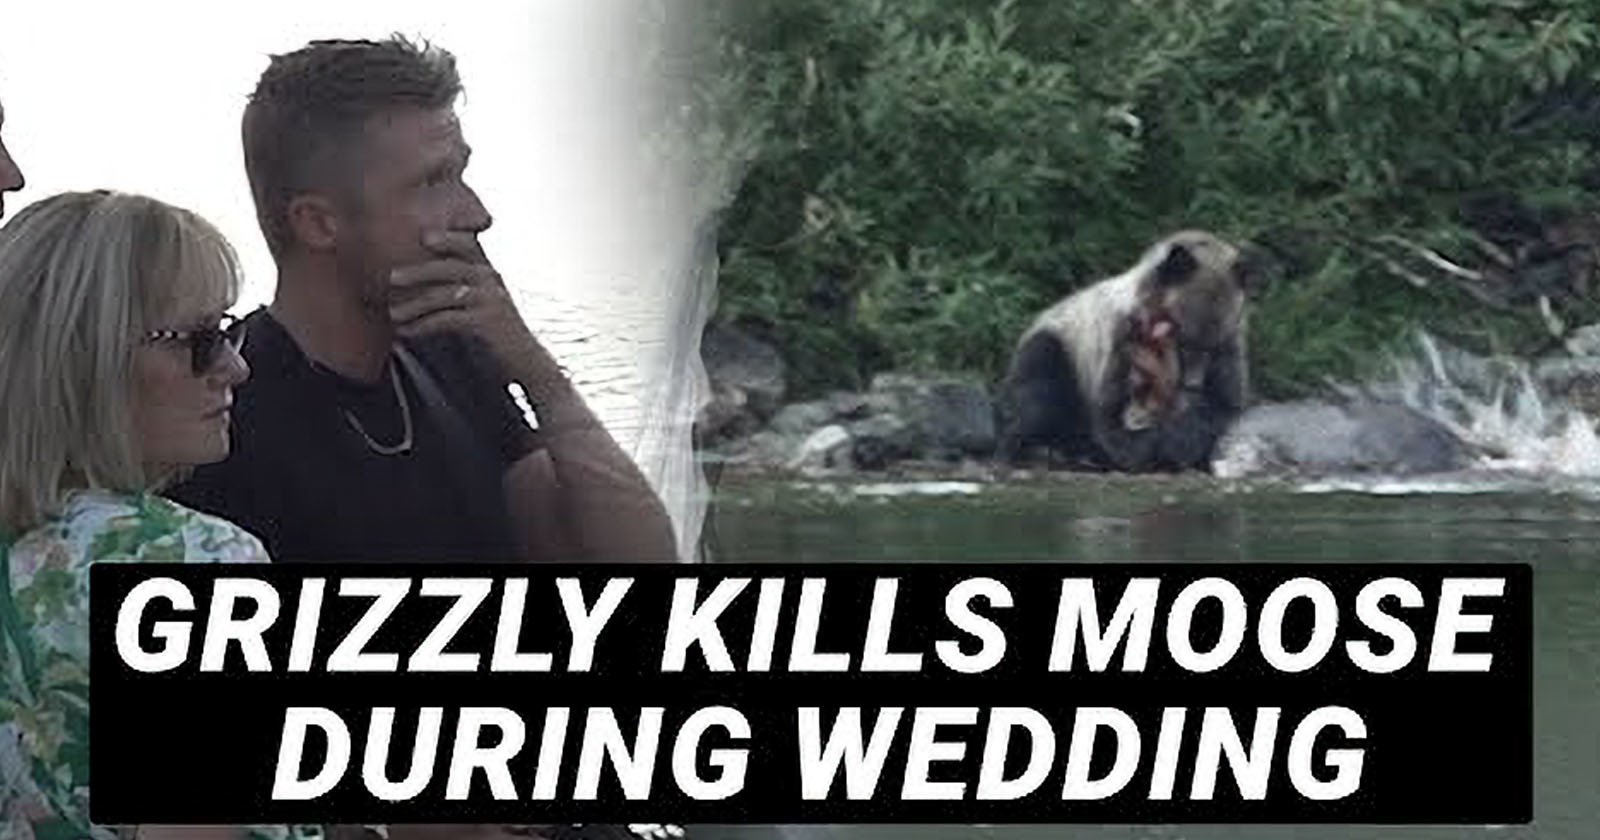 Videographer Films Moment Grizzly Bear Kill Moose During Wedding